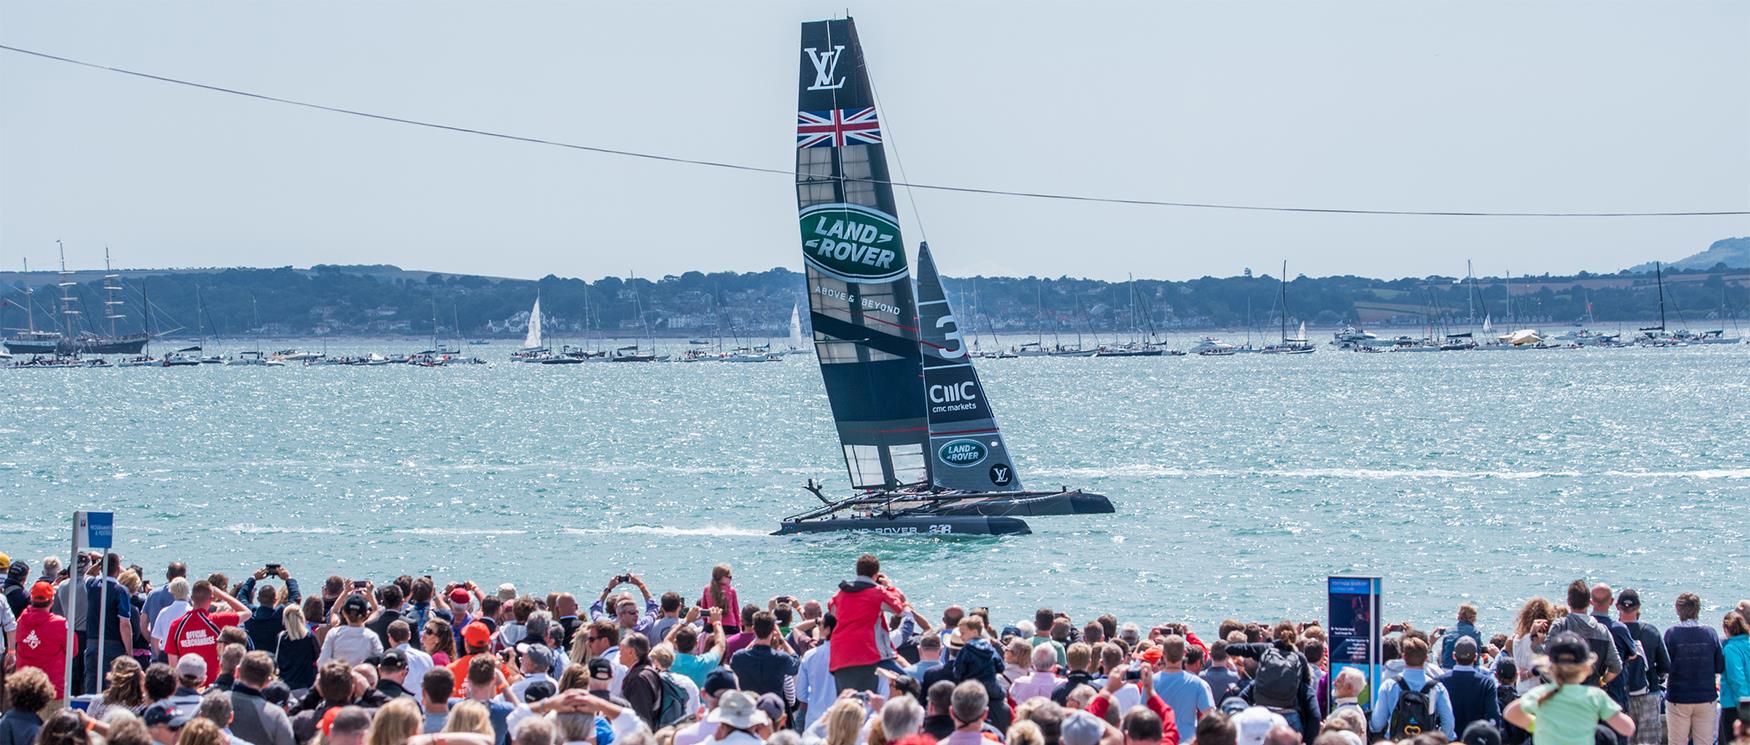 Louis Vuitton America's Cup World Series Portsmouth - Day 1